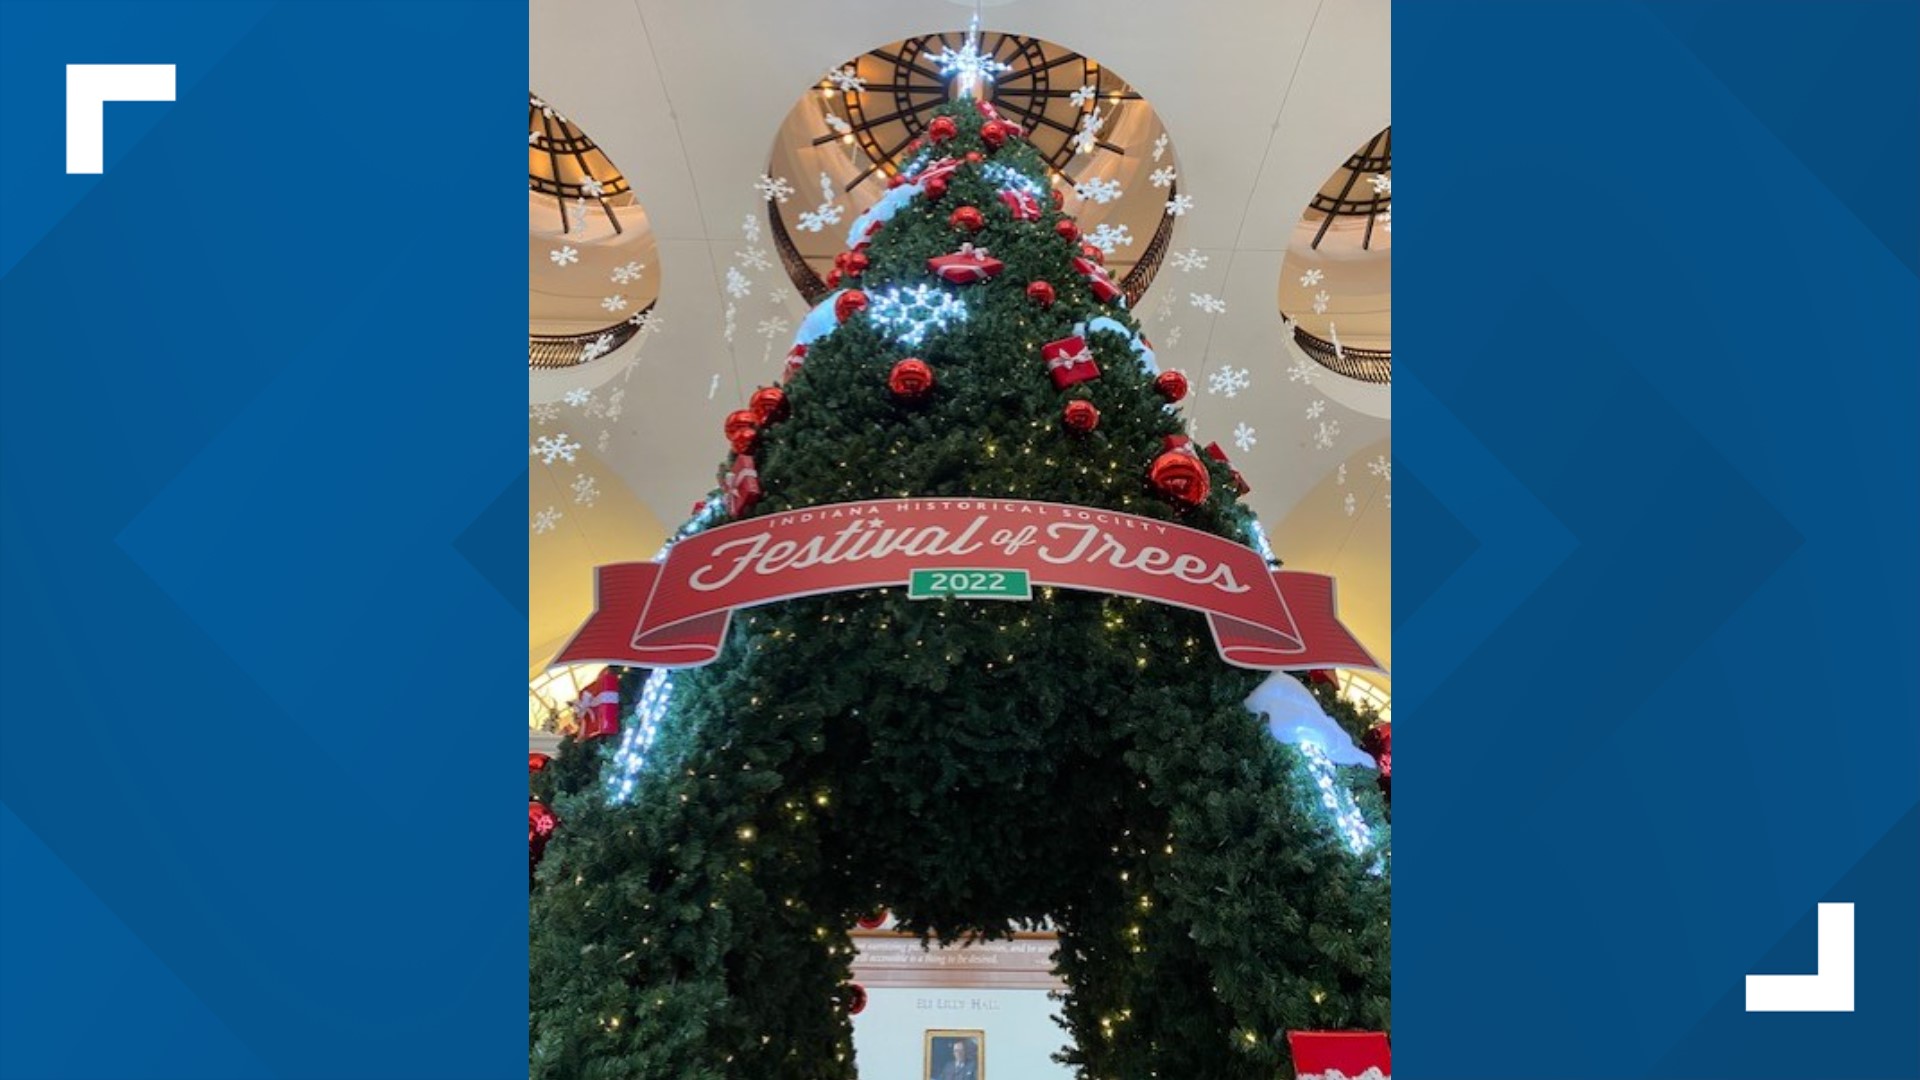 Festival of Trees begins Friday, Nov. 11 and goes through Saturday, Jan. 7, 2023, at the Eugene and Marilyn Glick Indiana History Center.